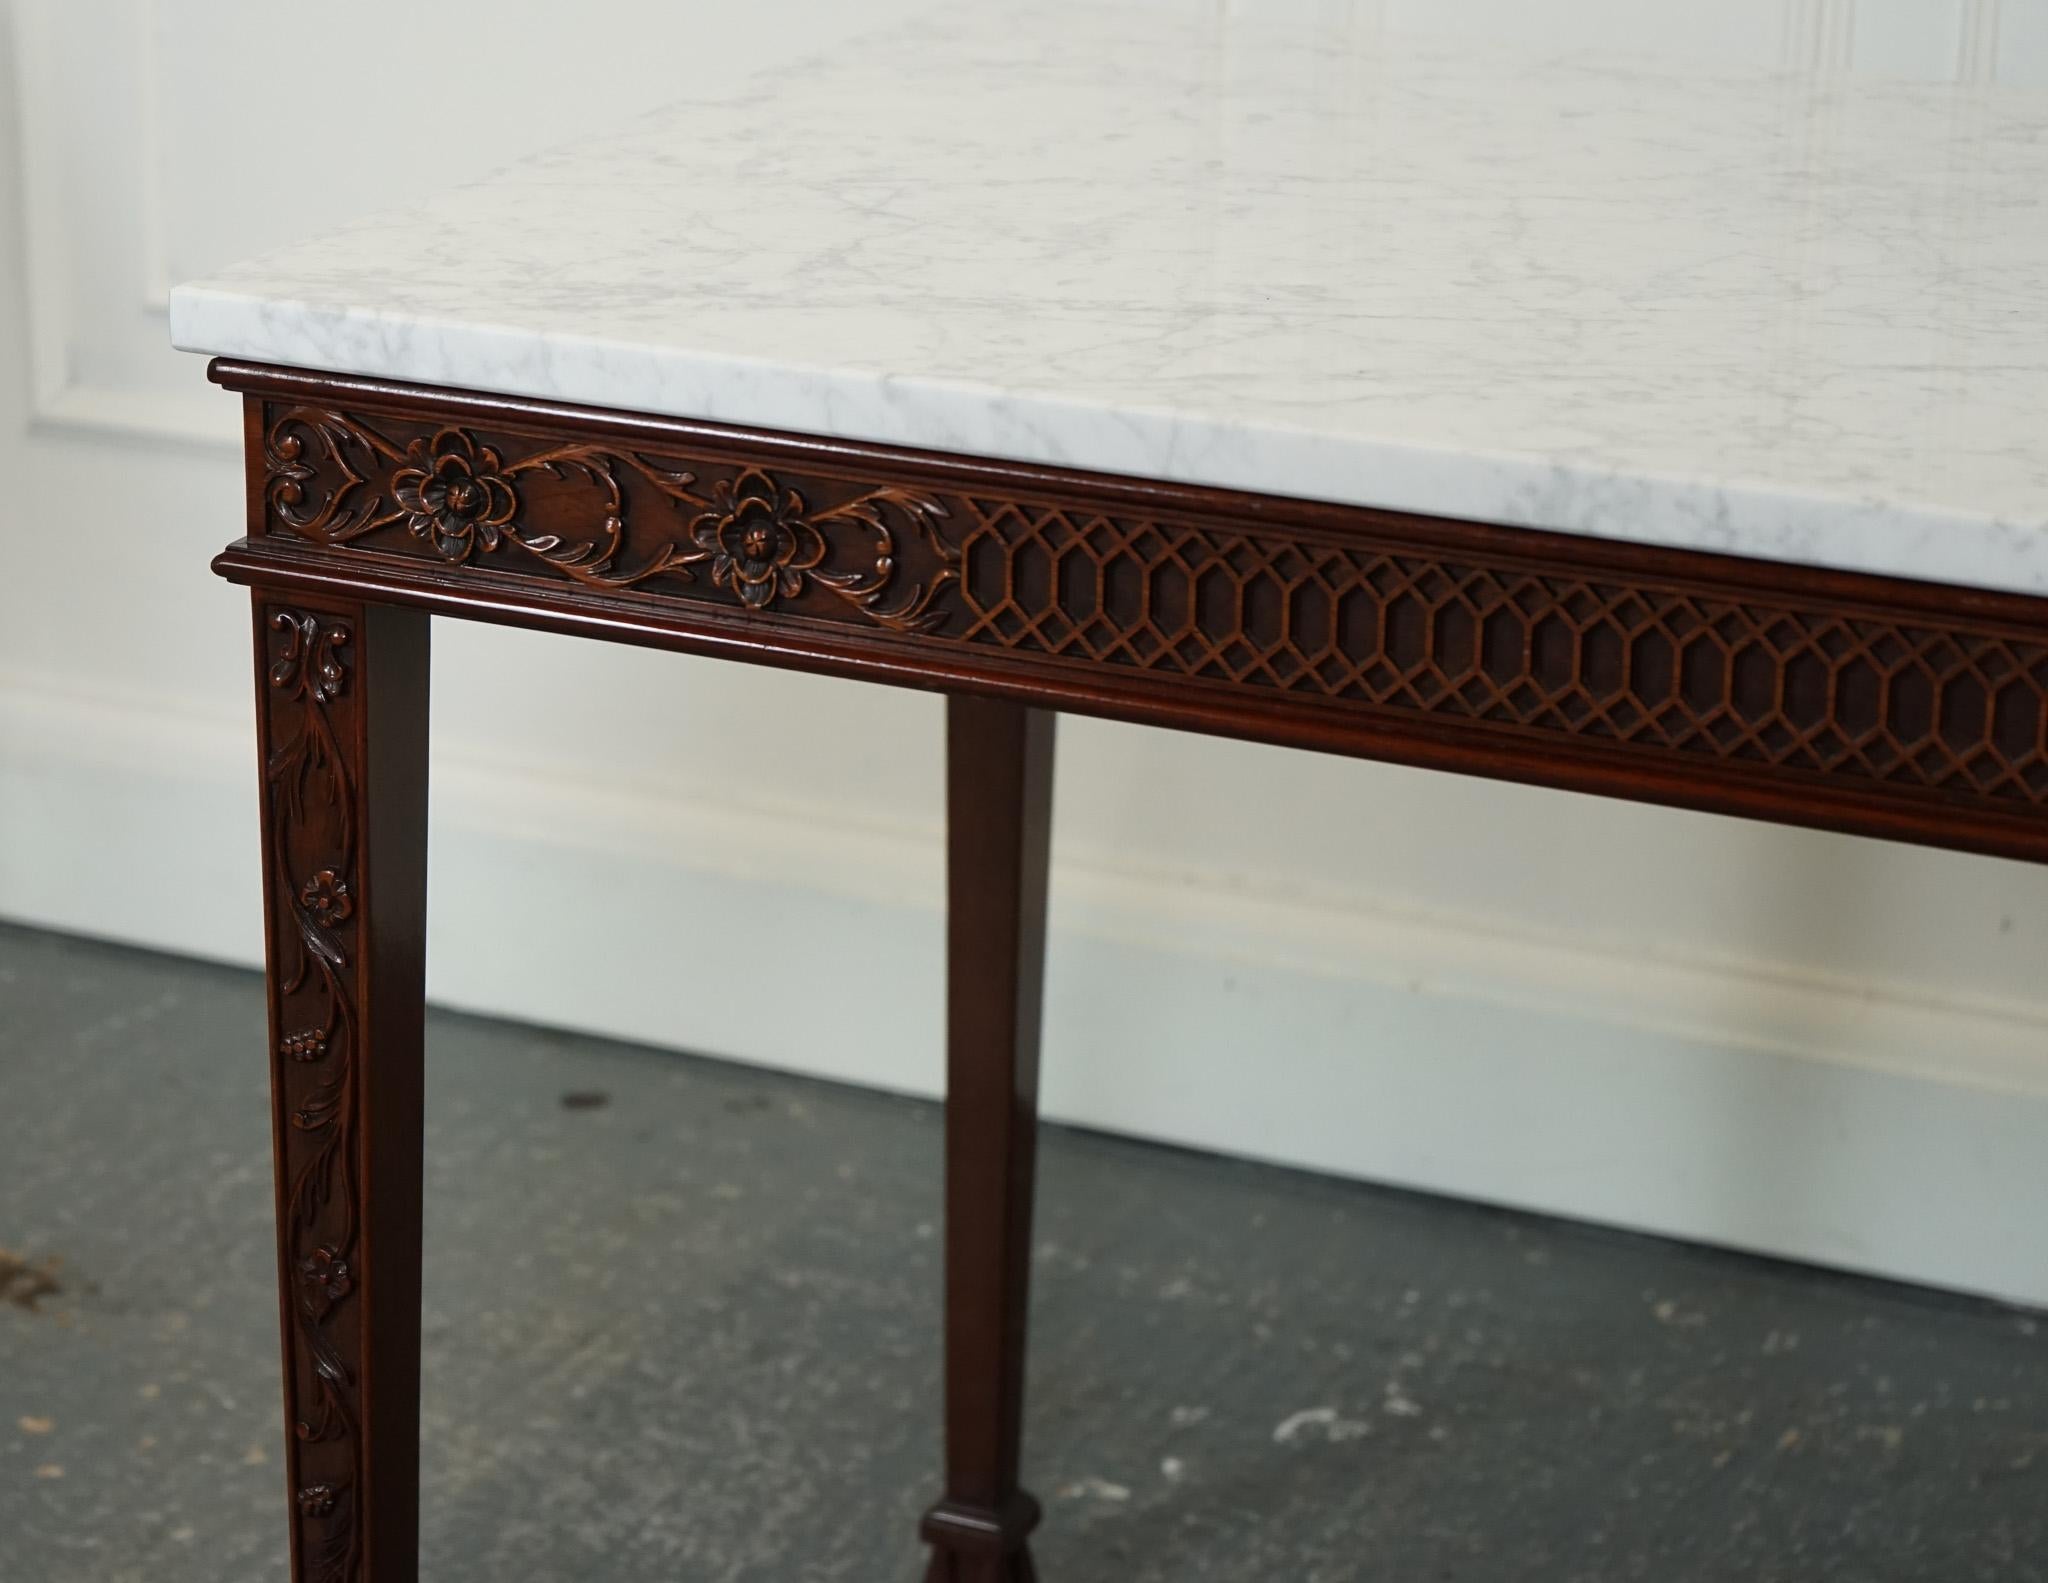 Hand-Crafted PAiR OF CHIPPENDALE STYLE CONSOLE TABLES WITH NEW WHITE CARRARA MARBLE TOPS For Sale